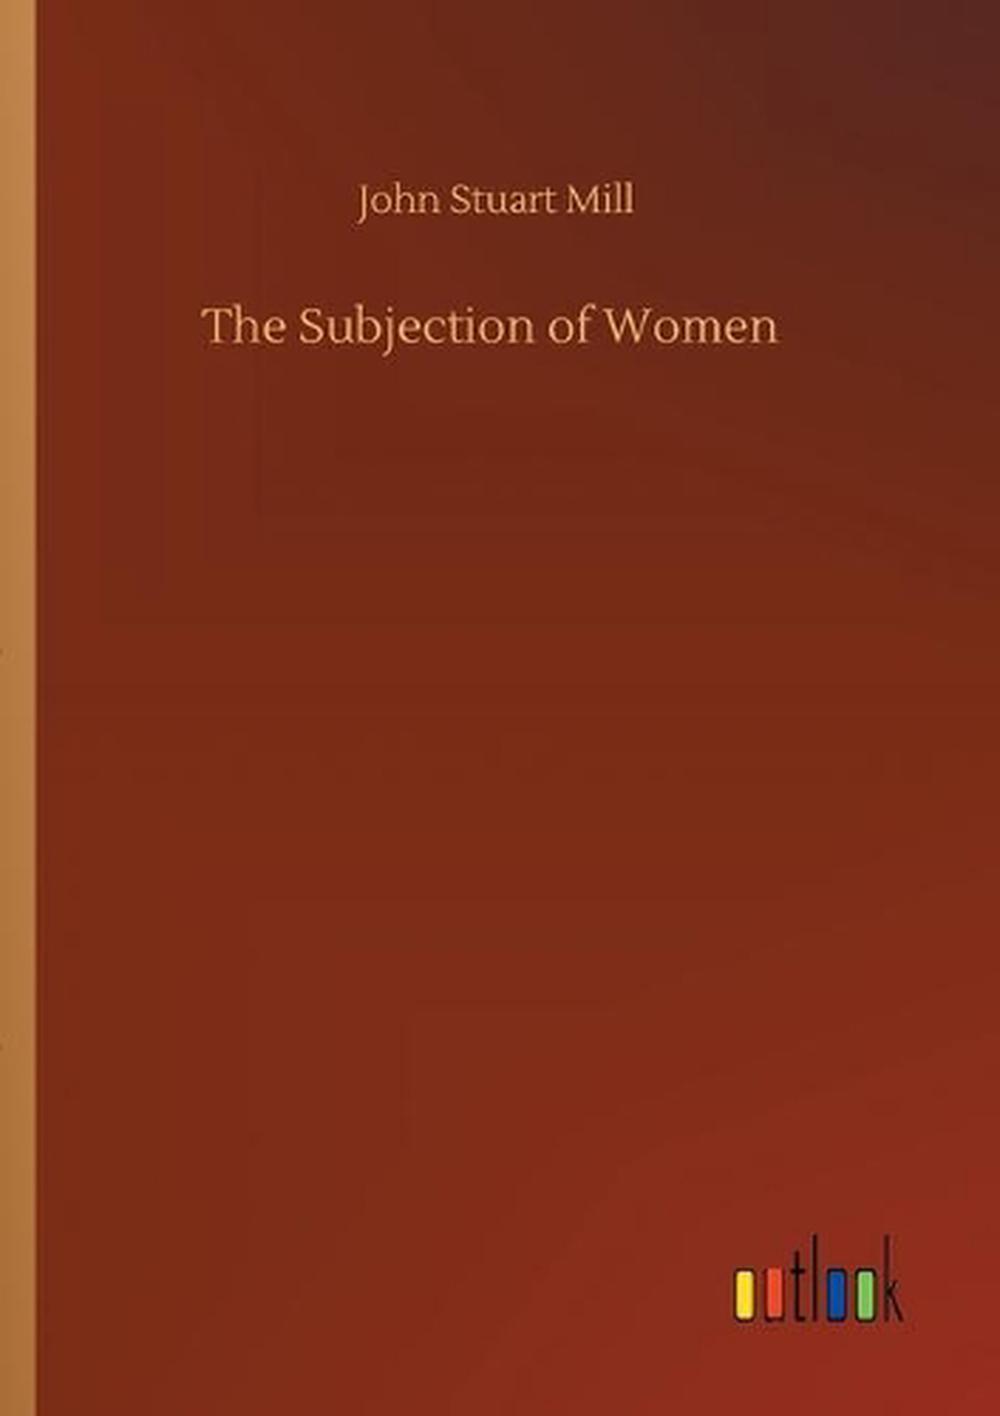 mill the subjection of women